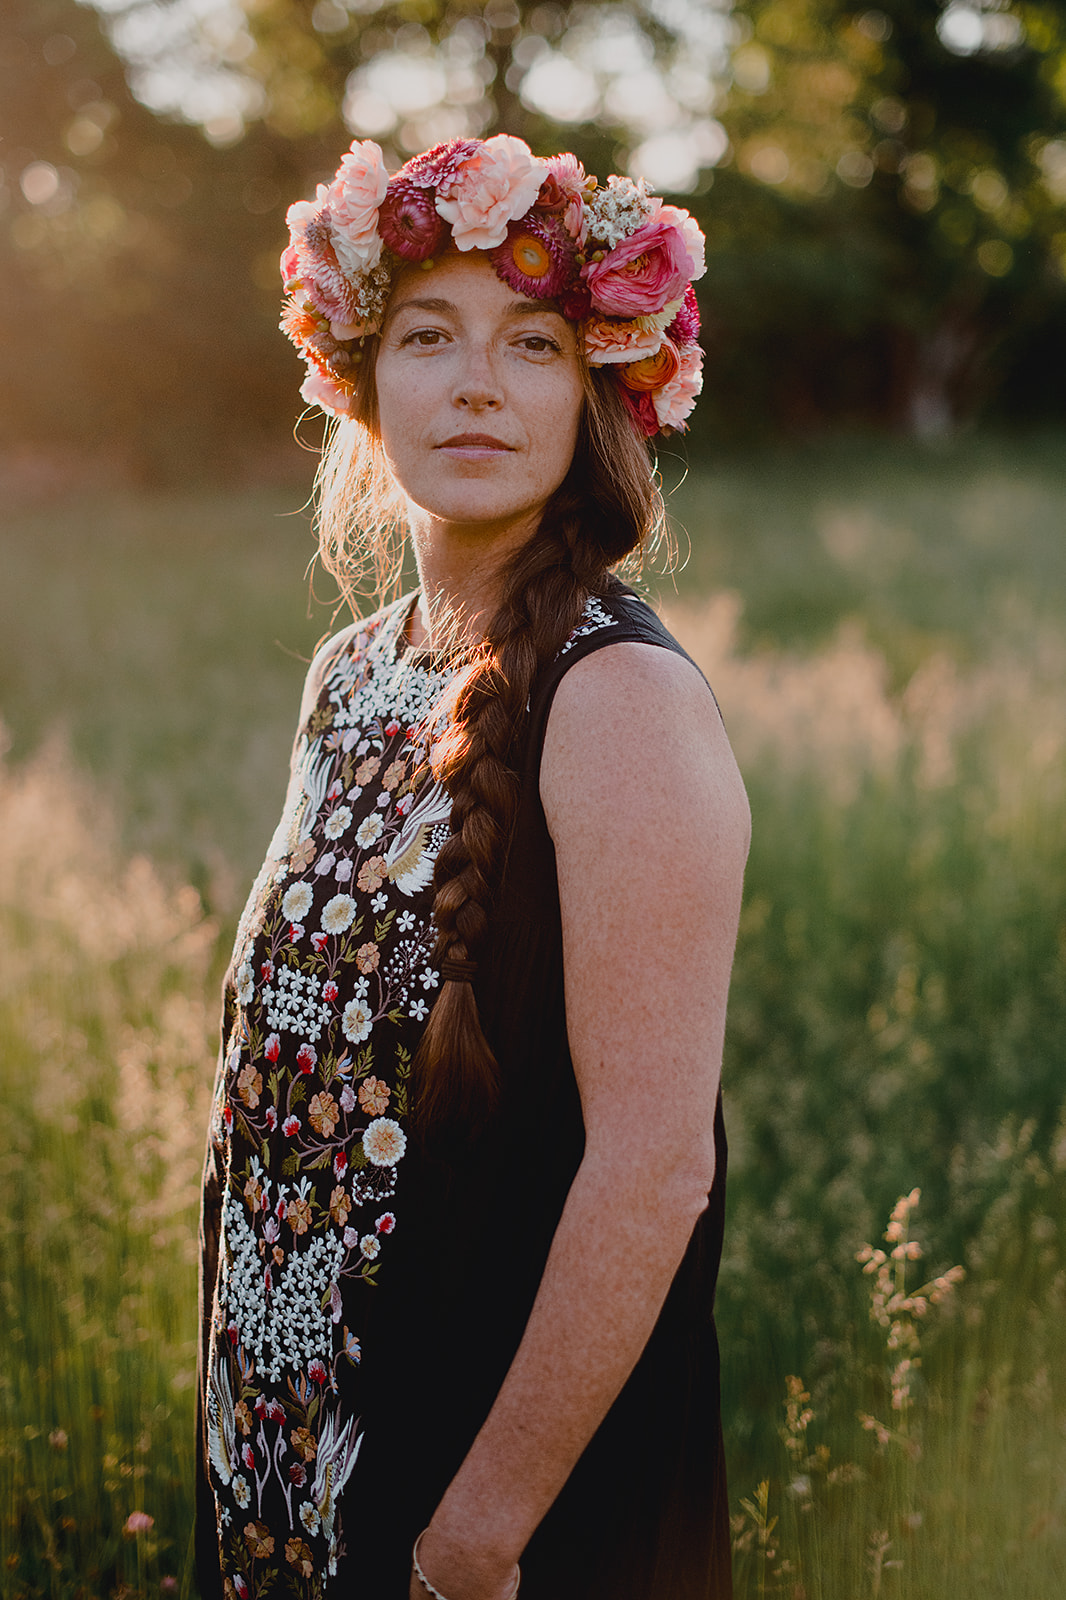 Golden hour portrait of bride wearing large colorful flower crown and black maxi dress embroidered down middle.